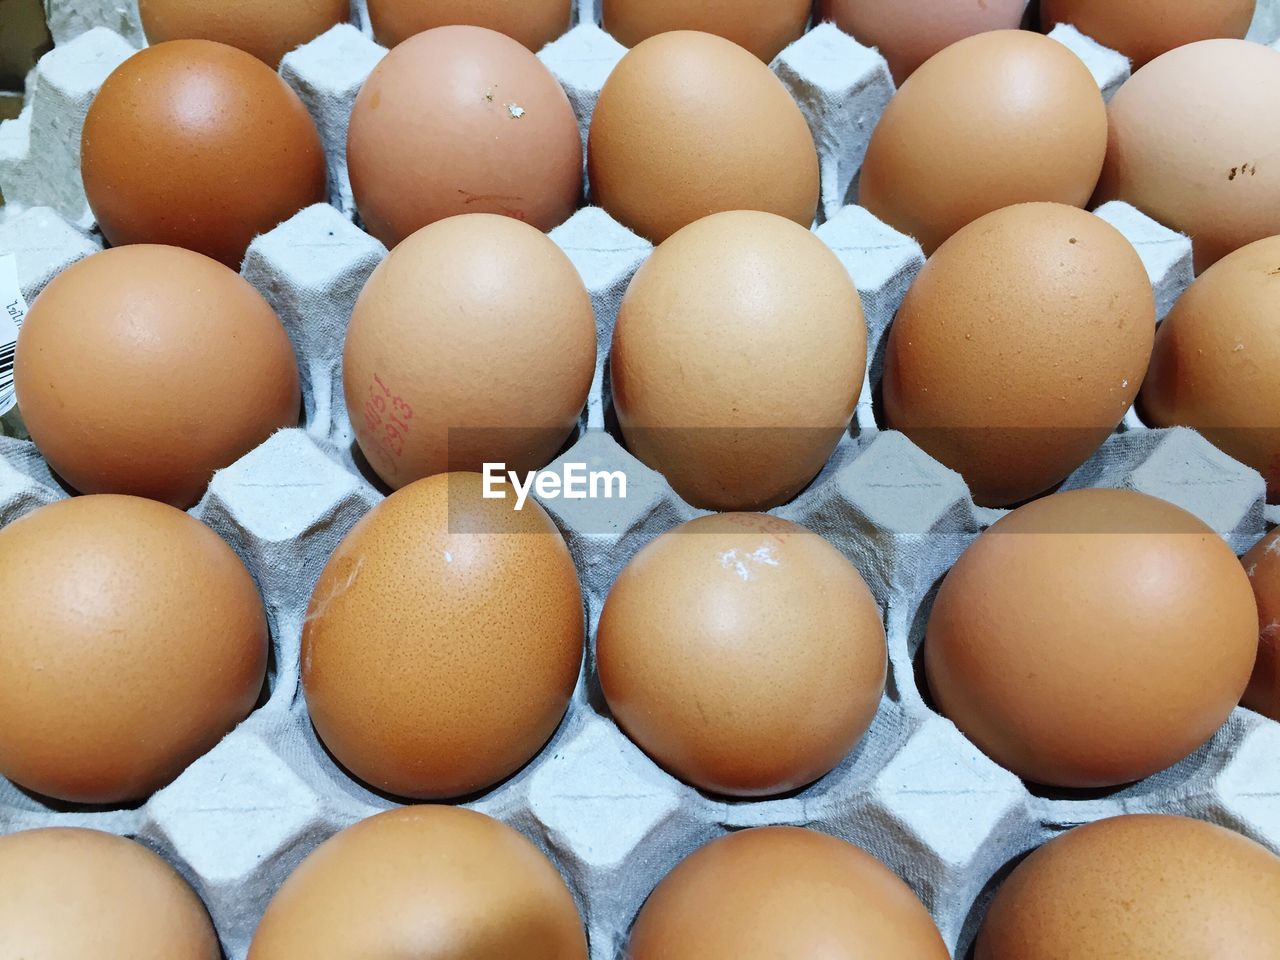 HIGH ANGLE VIEW OF EGGS IN MARKET STALL